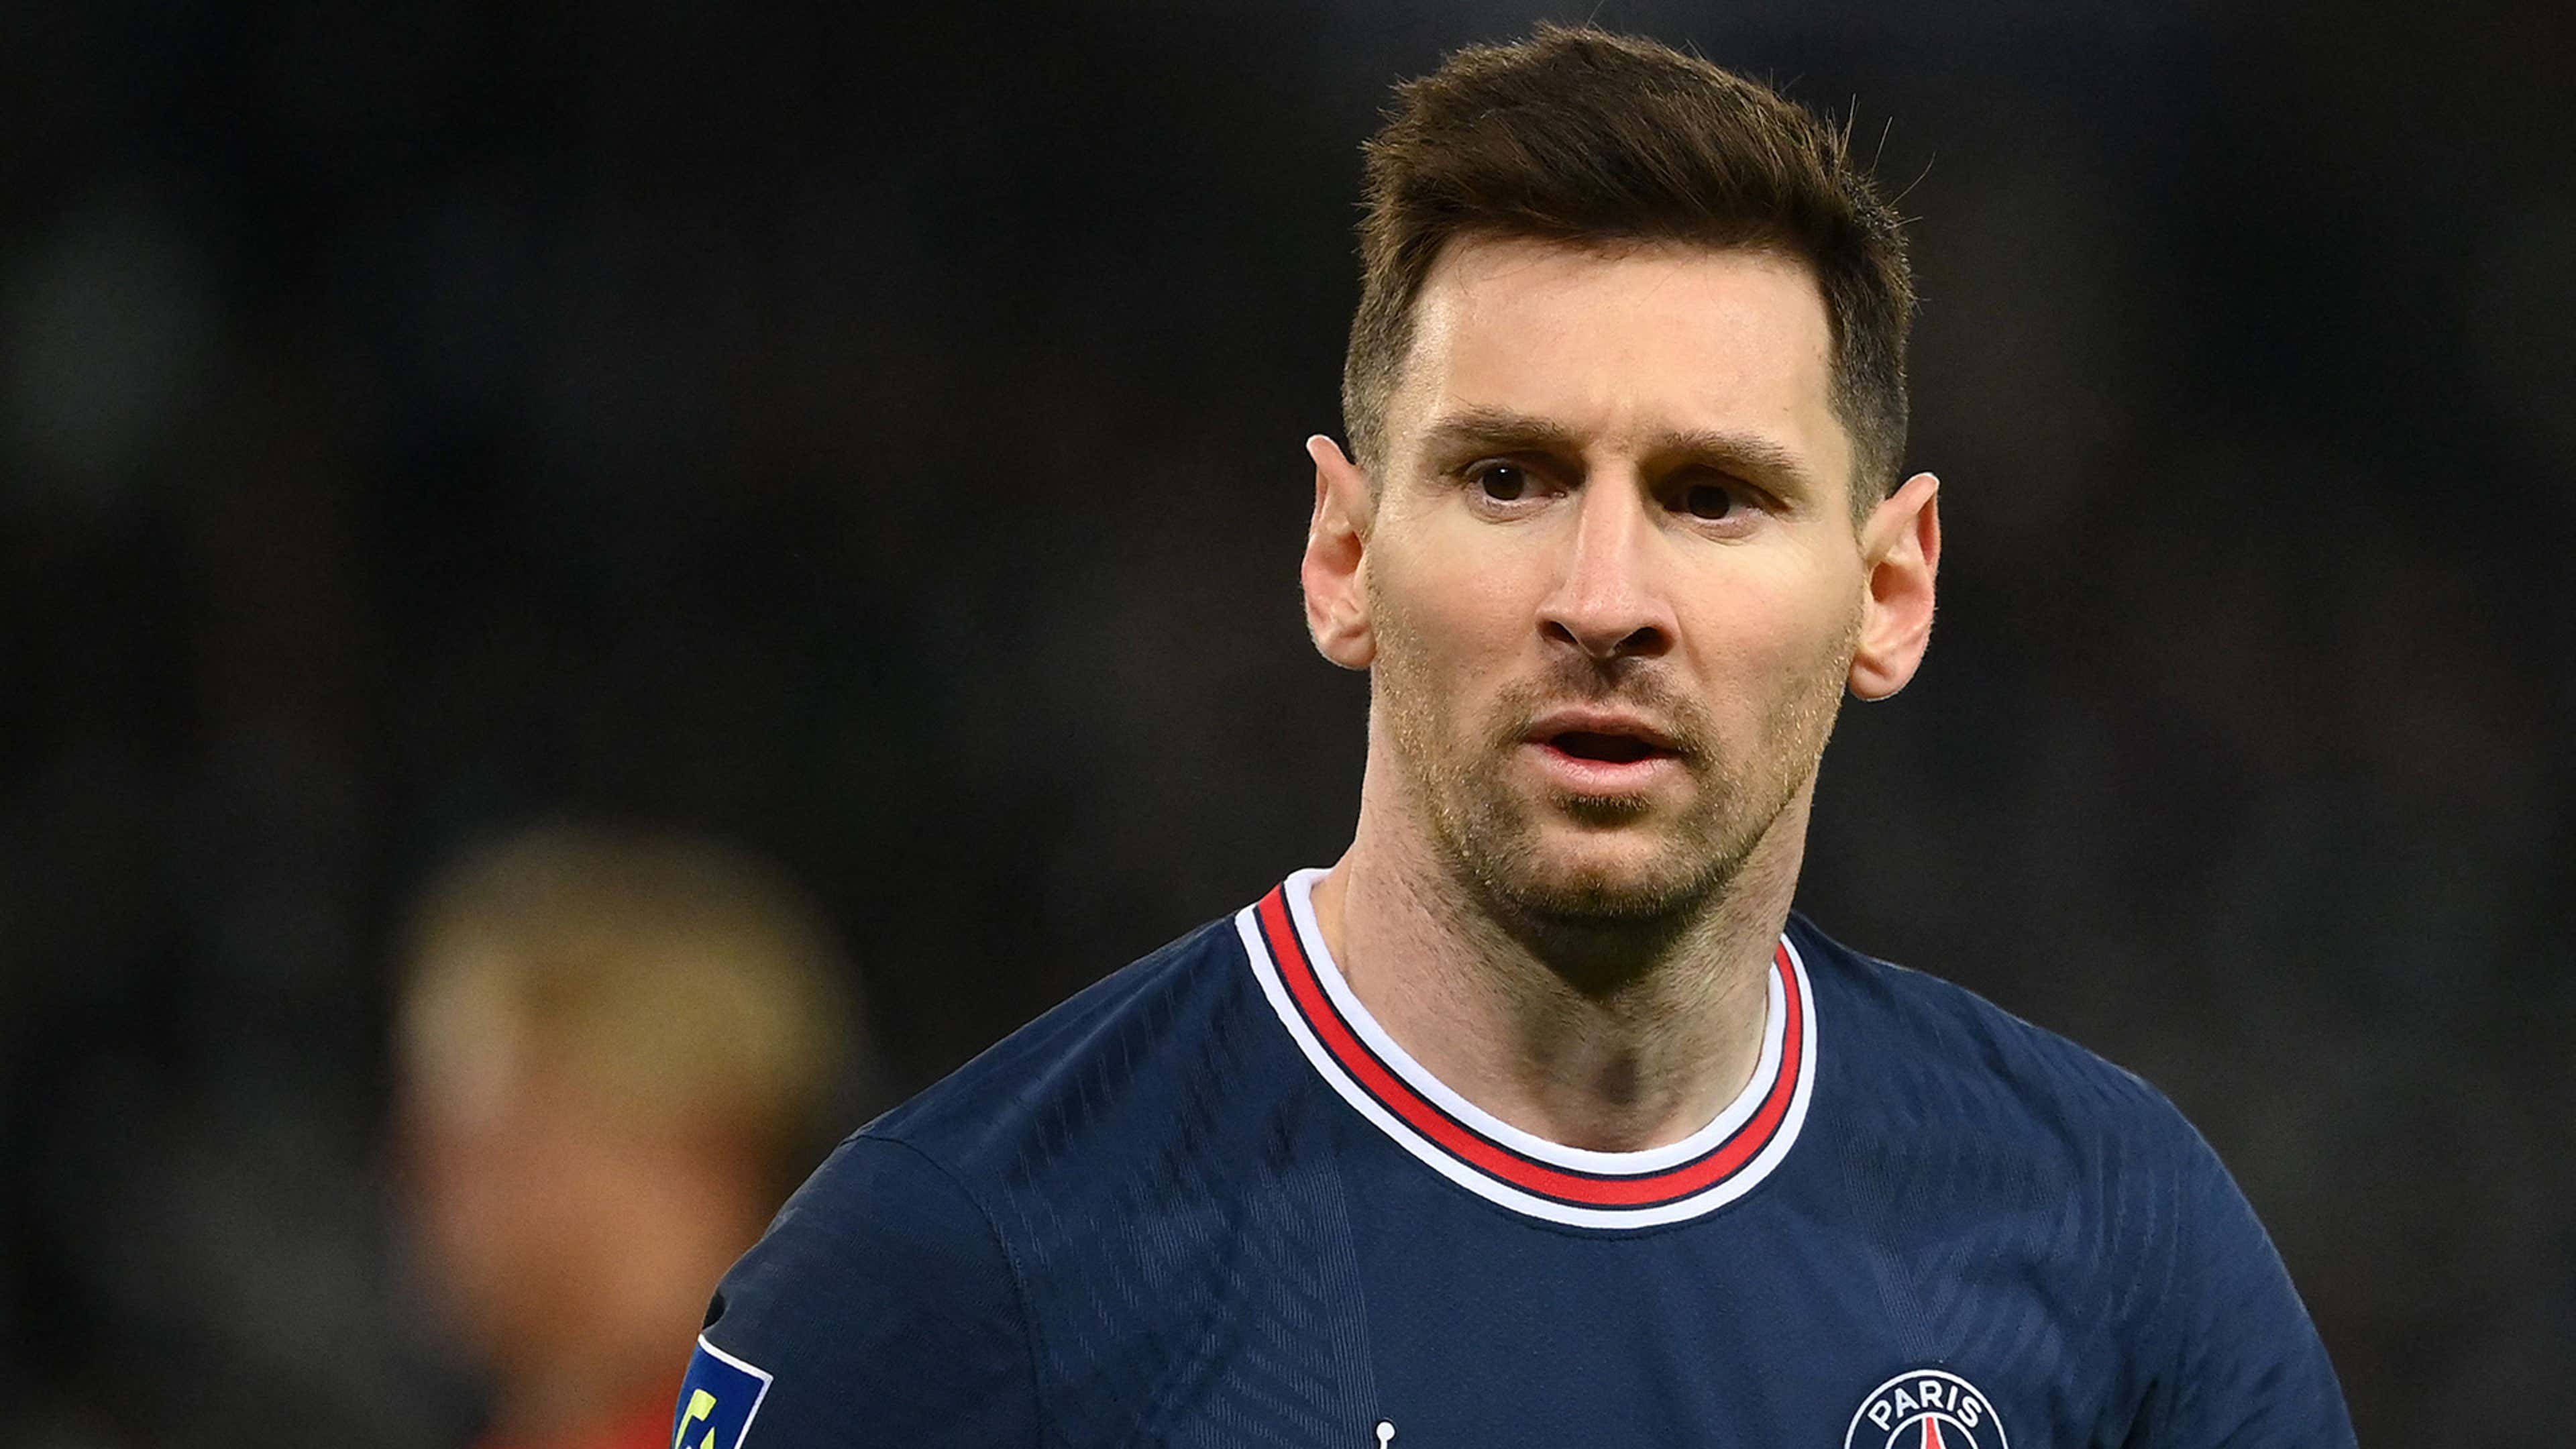 If Messi goes to Inter Miami, the fanfare will be like Pele' – PSG  superstar tipped for MLS move by ex-USMNT star Howard